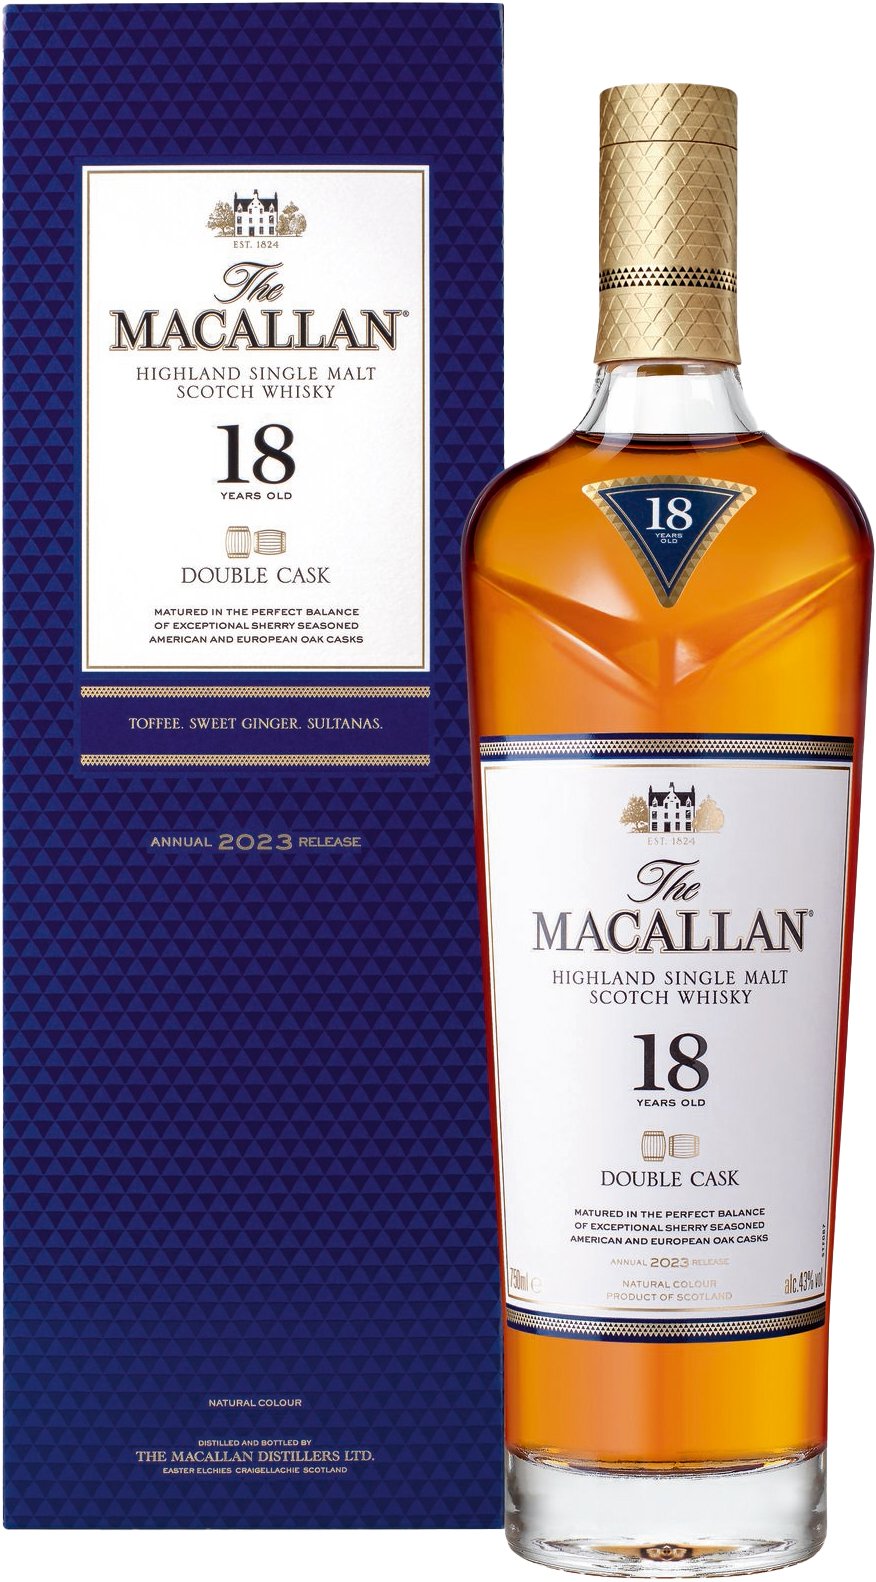 Macallan 18 year old Double Cask